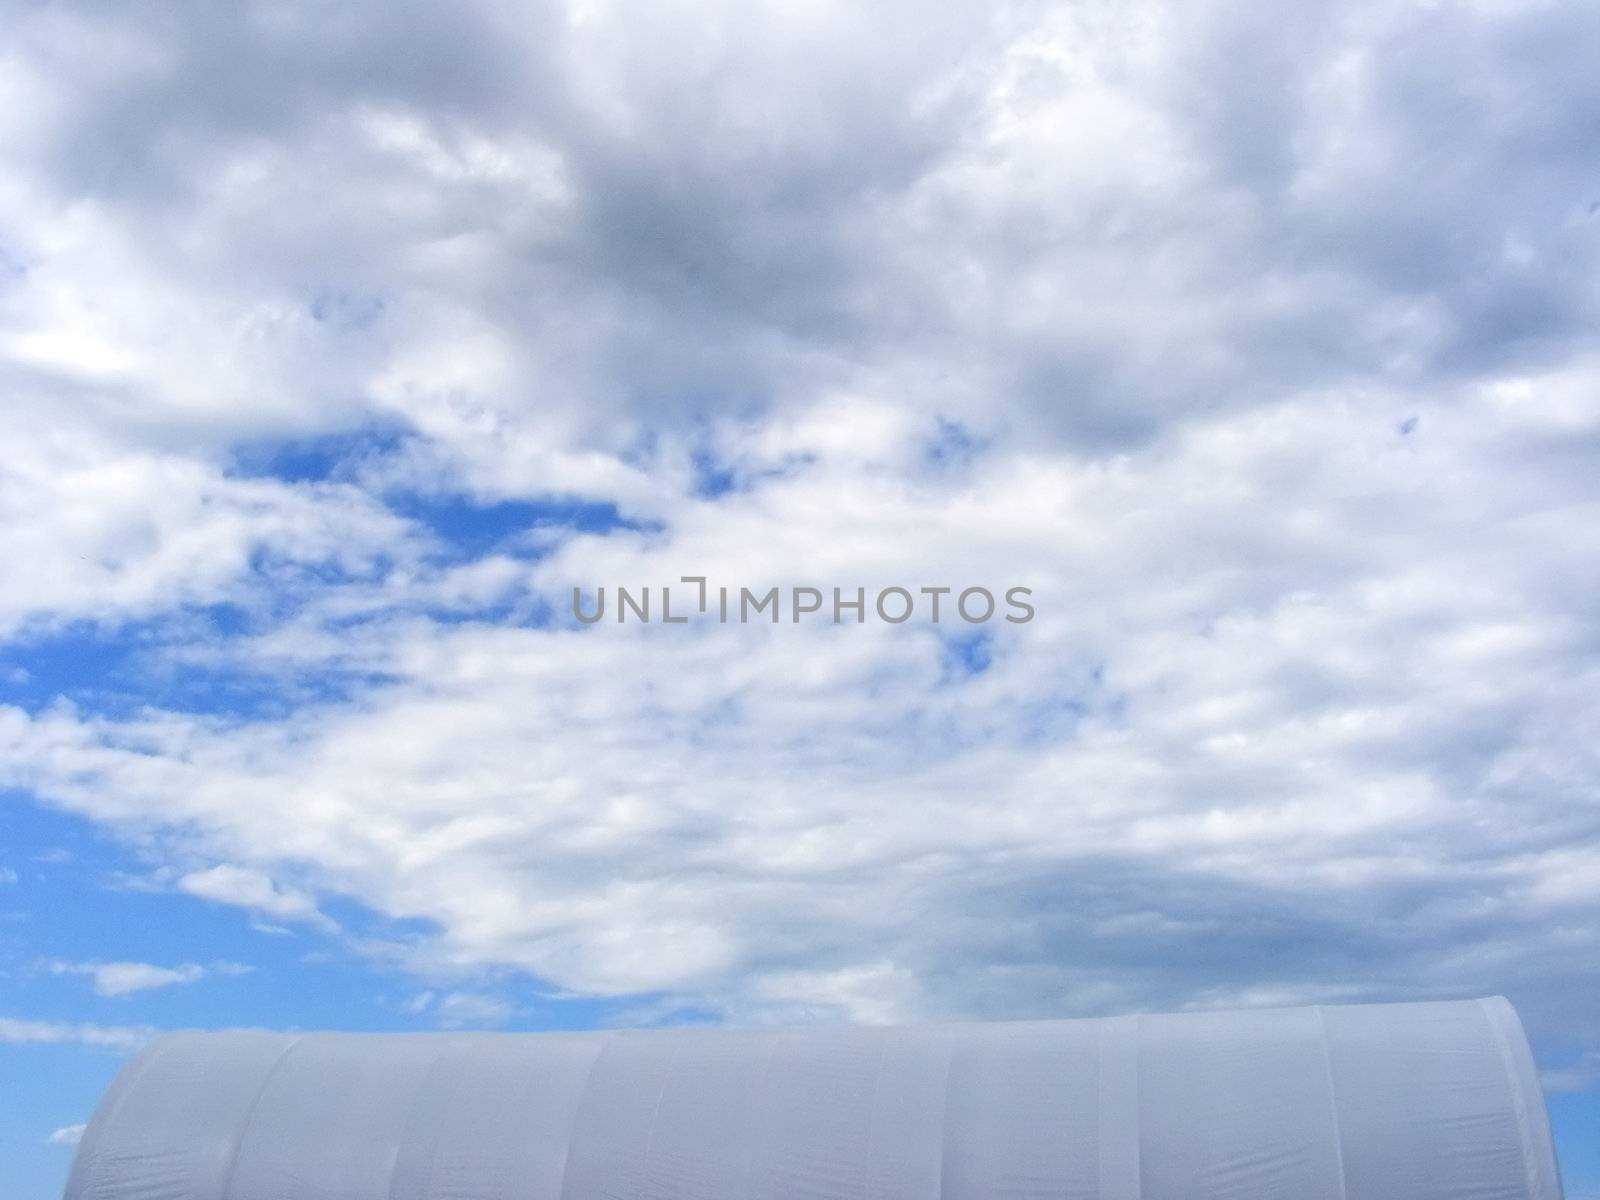 White Shelter on Cloudy Day Horizontal by watamyr